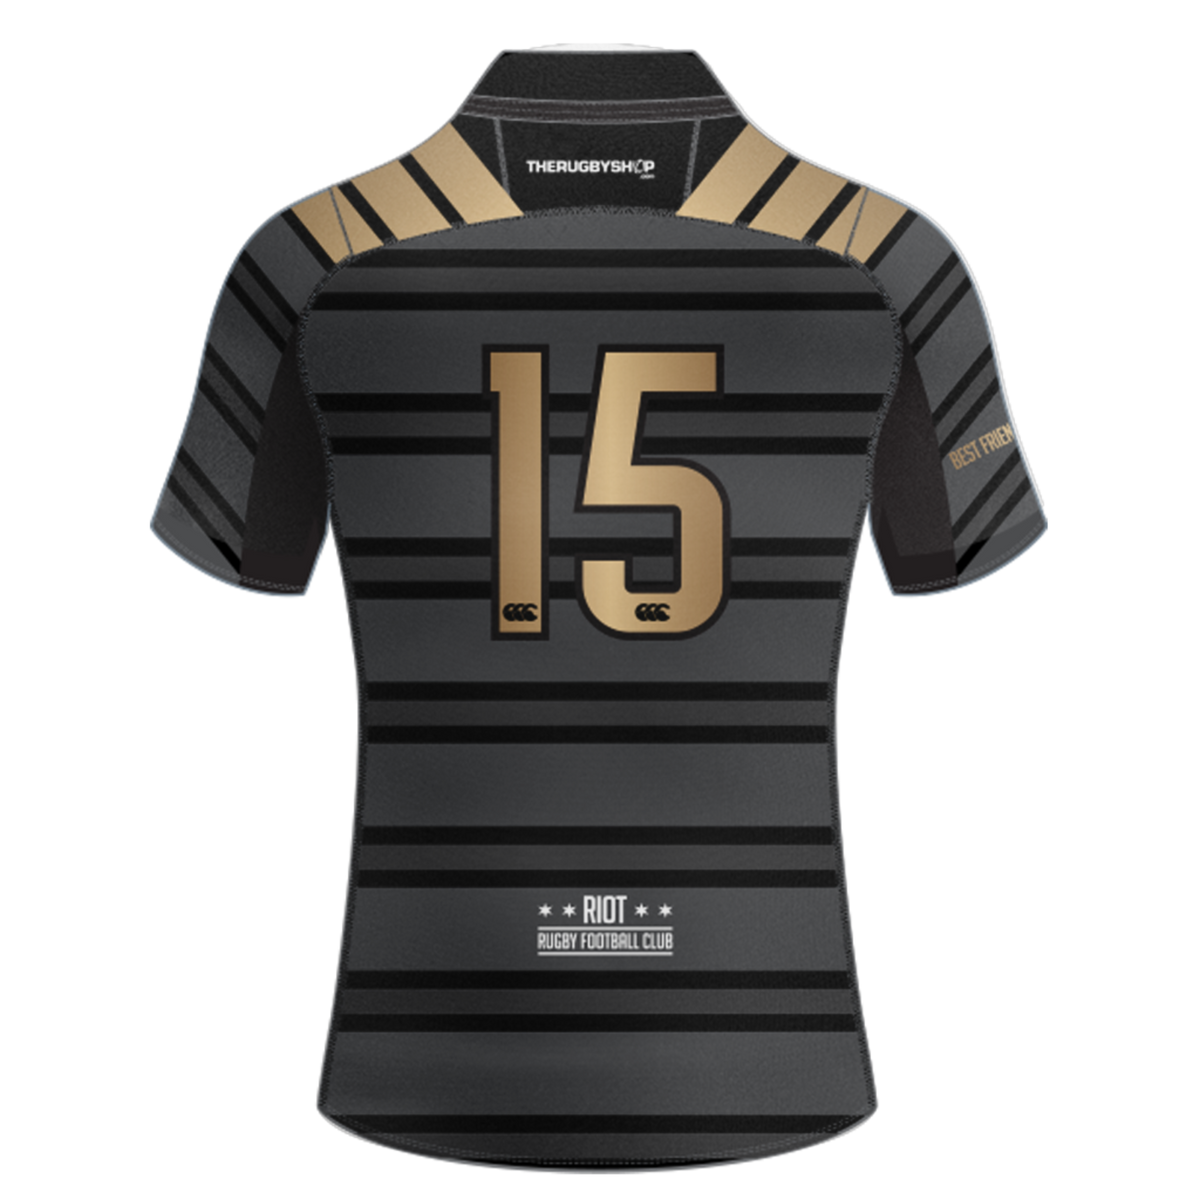 Canterbury CCC Chicago Riot 2021 Replica Jersey, Black/Gold Unisex  Sizing S - 3XL